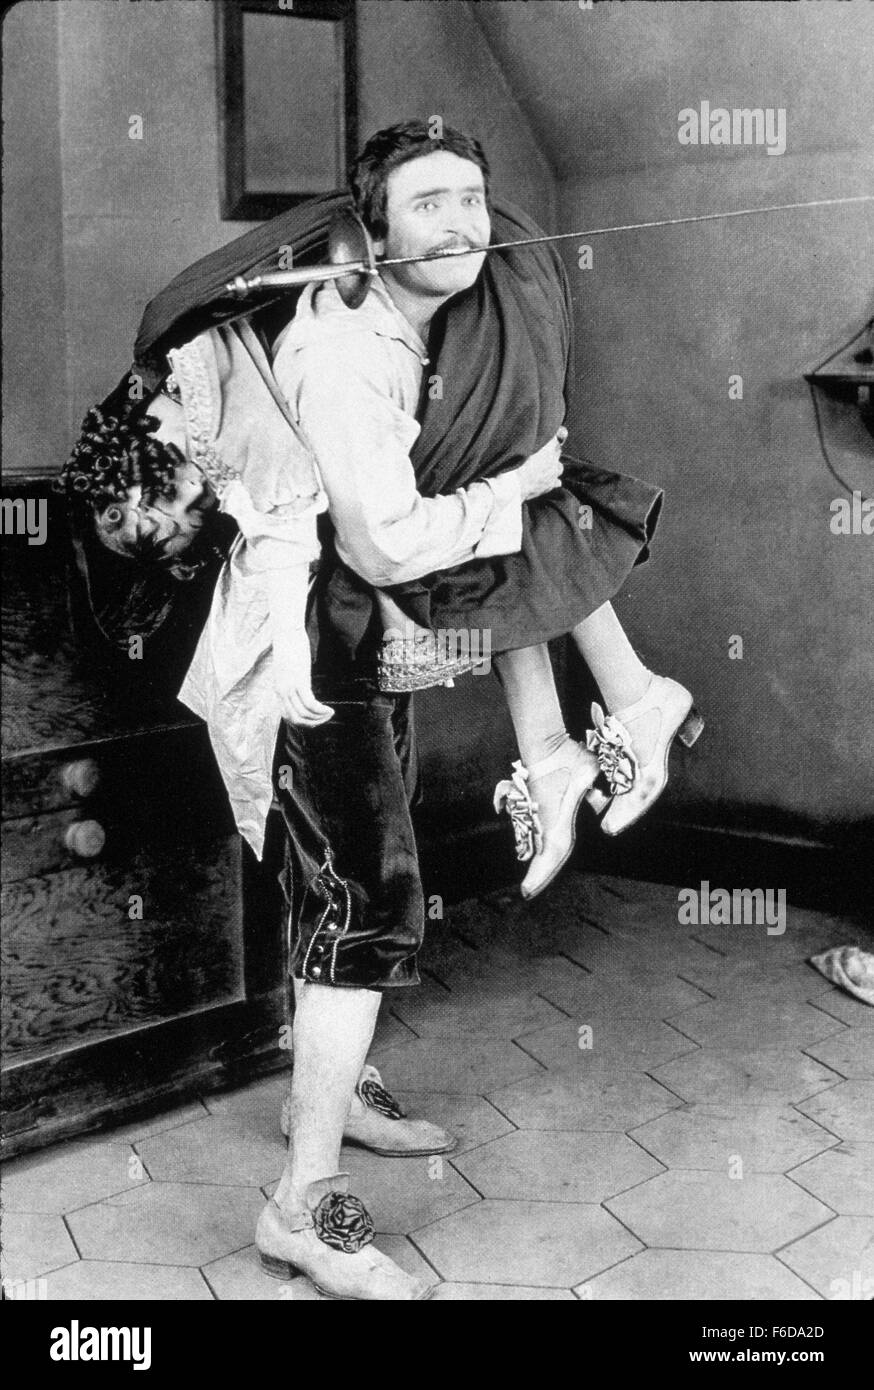 RELEASE DATE: August 28, 1921   MOVIE TITLE: The Three Musketeers   STUDIO: Douglas Fairbanks Pictures   PLOT: The young Gascon D'Artagnan arrives in Paris, his heart set on joining the king's Musketeers.   PICTURED: DOUGLAS FAIRBANKS. Stock Photo